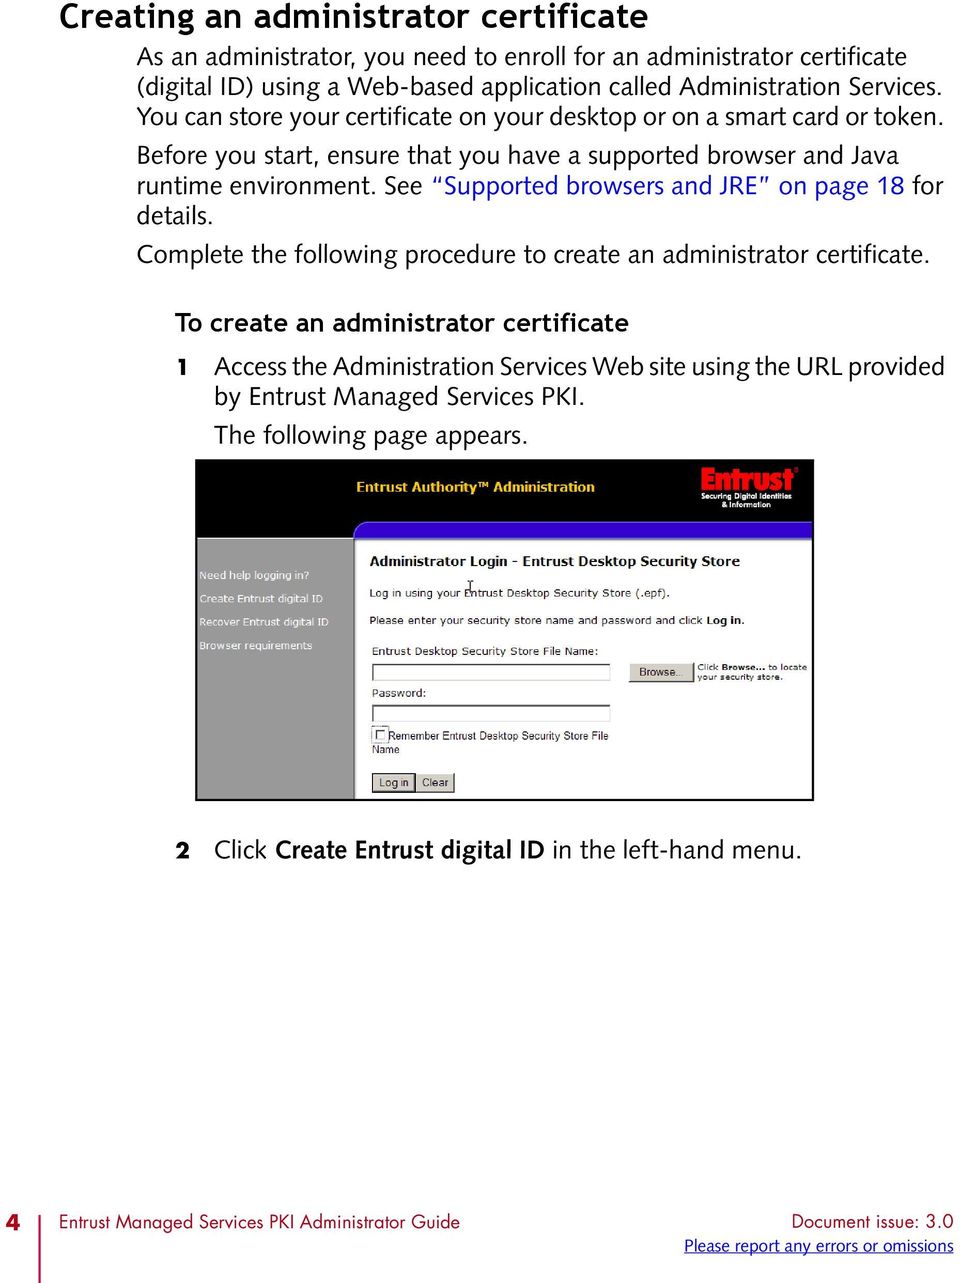 See Supported browsers and JRE on page 18 for details. Complete the following procedure to create an administrator certificate.